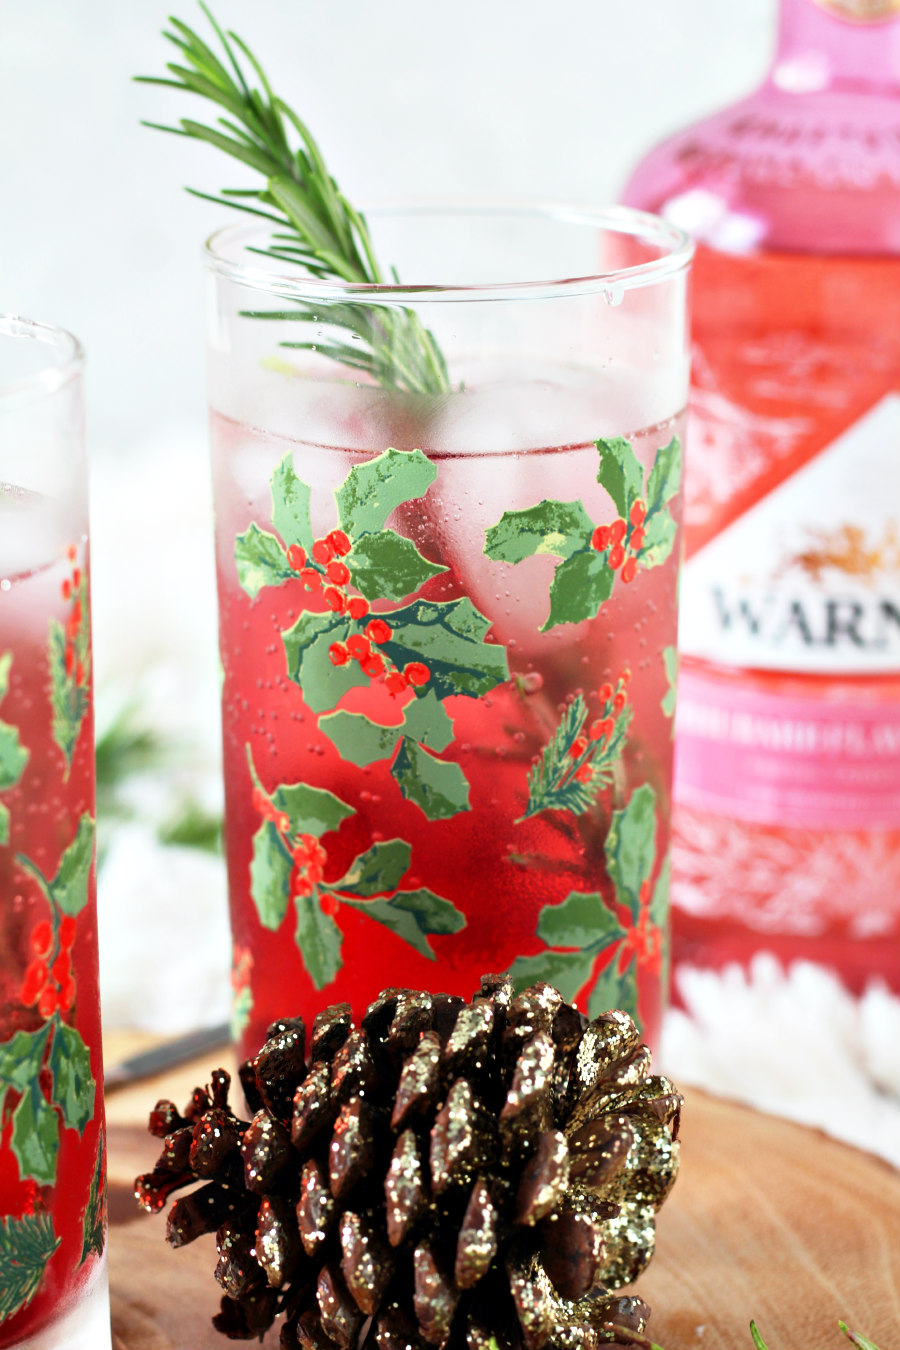 Rhubarb and Cranberry Gin and Tonic in holly berry glass garnished with fresh rosemary sprig. Bottle of Warner's Rhubarb Gin sits in background. Sparkly pine cone sits in front of glass.